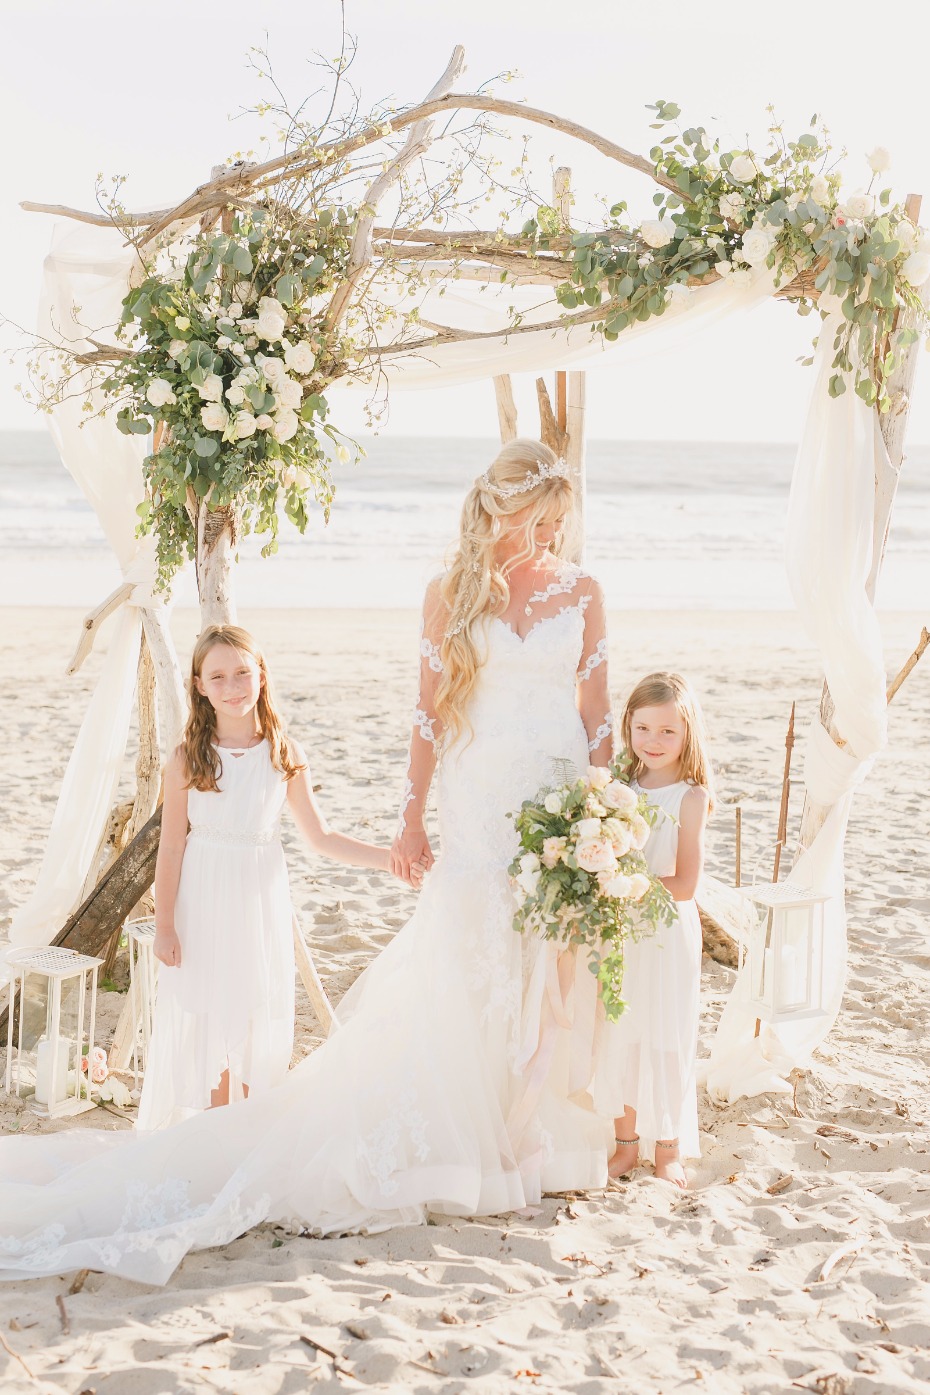 the bride and her flower girls at her elegant beach wedding ceremony